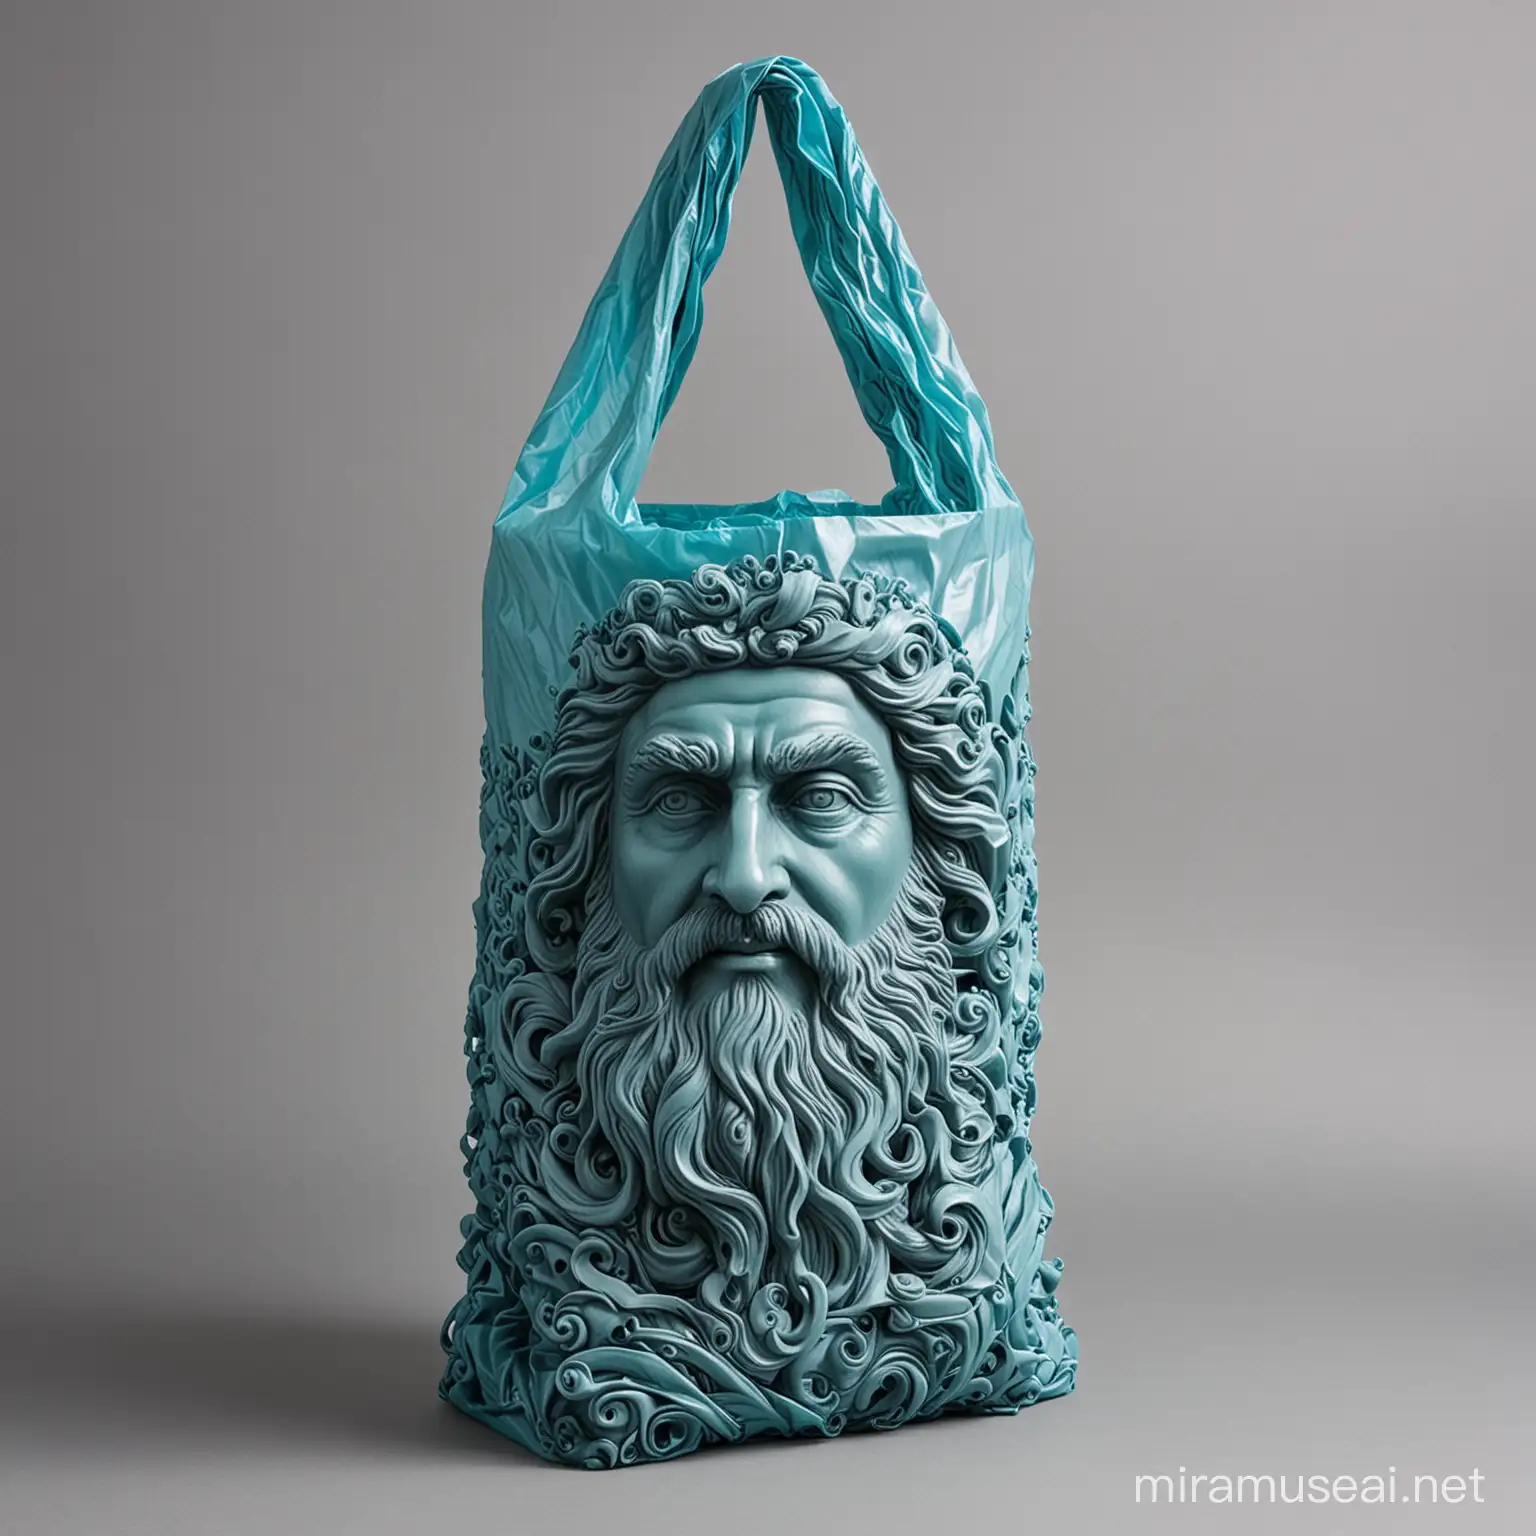 Poseidon and Marine Life with Recycled Plastic Bags